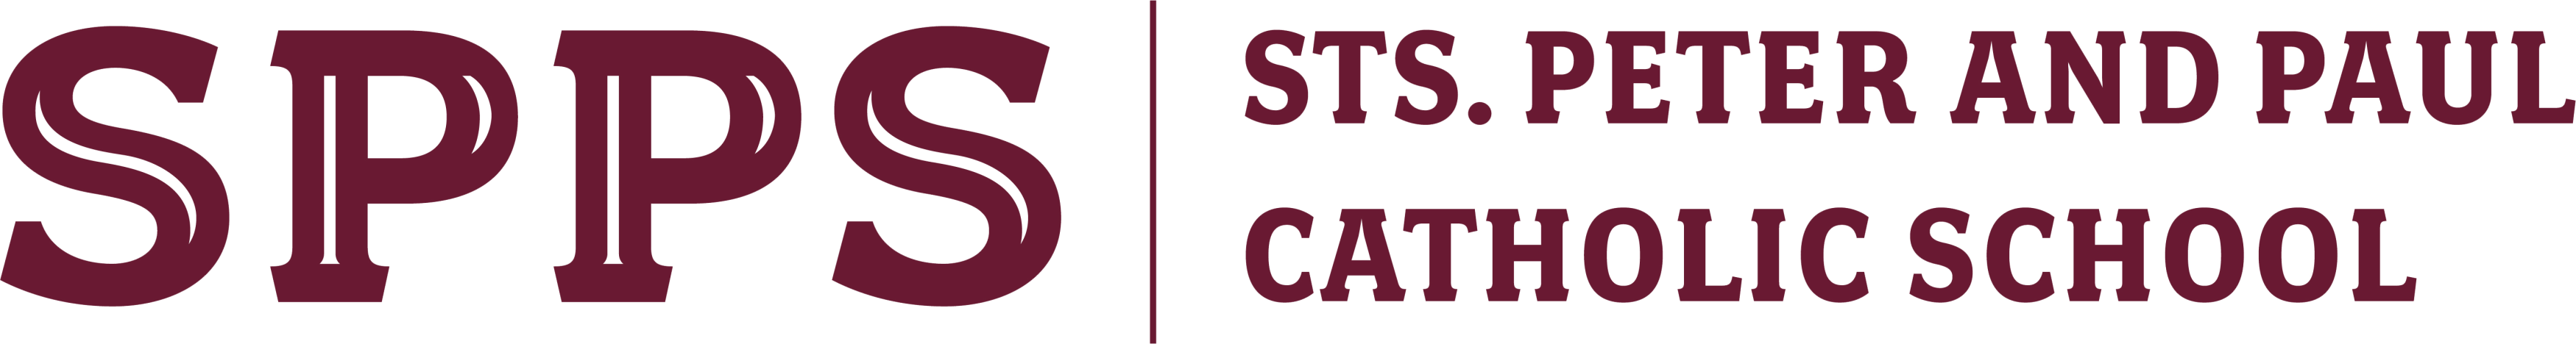 Footer Logo for Sts Peter and Paul Catholic School